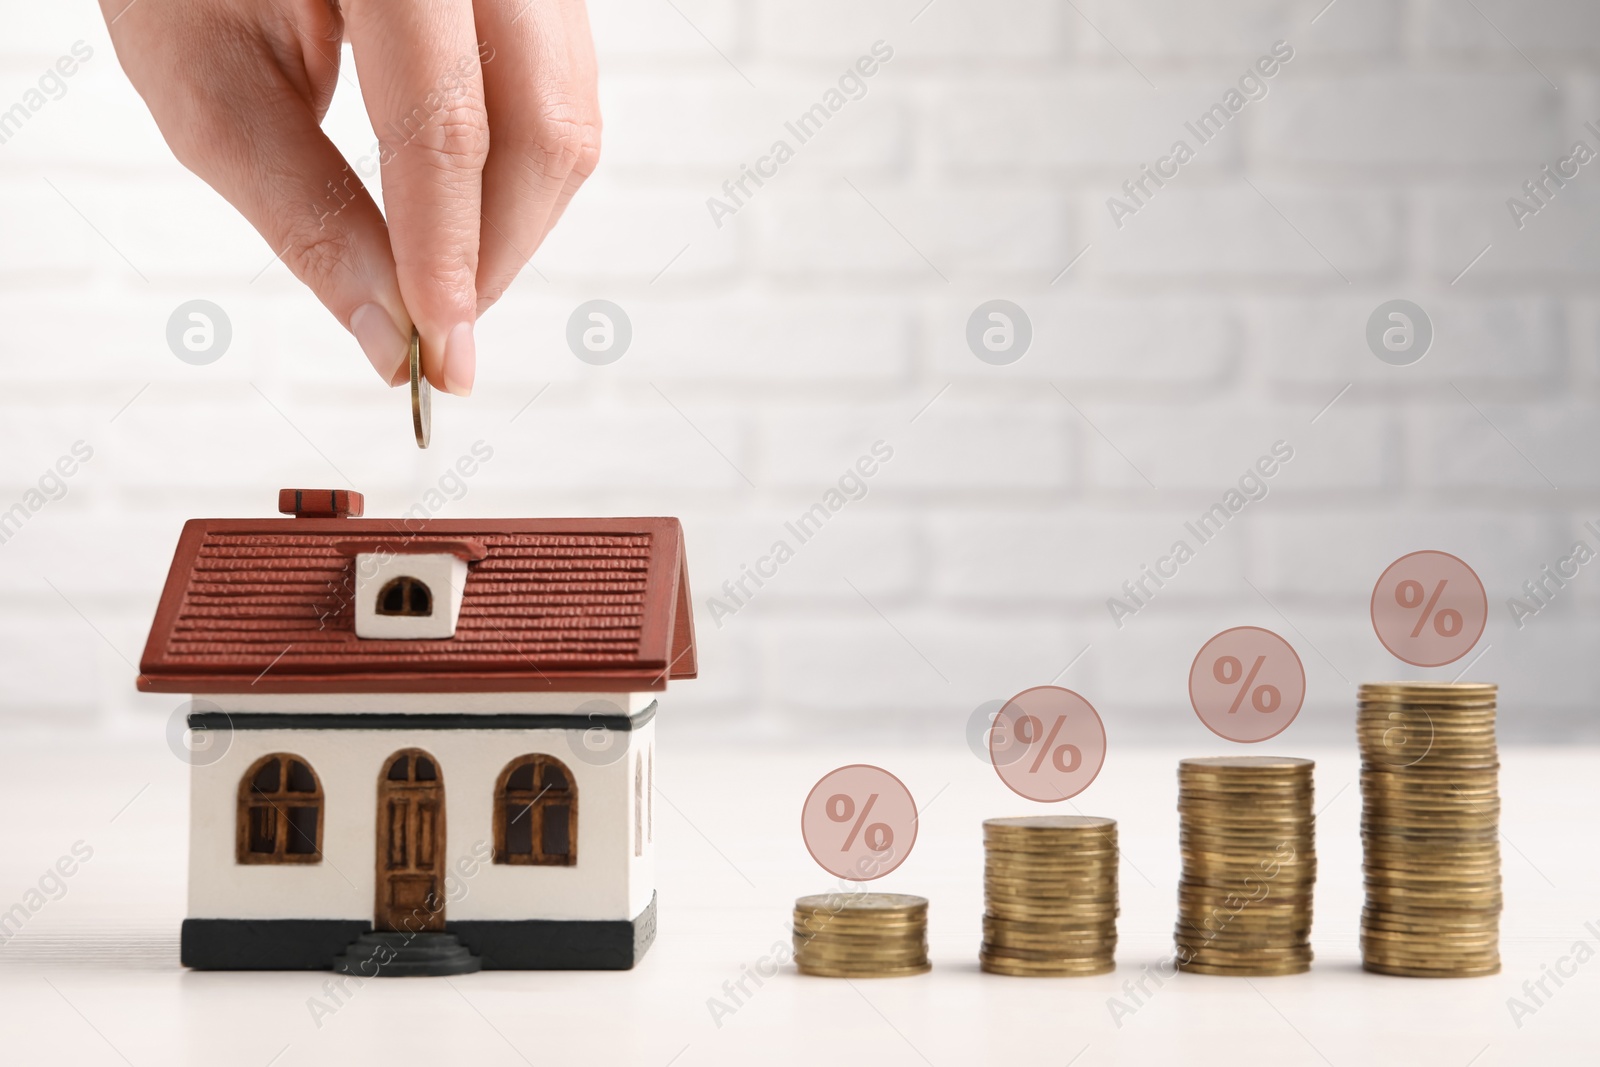 Image of Mortgage rate. Woman putting coin into house shaped money box, closeup. Stacked coins and percent signs